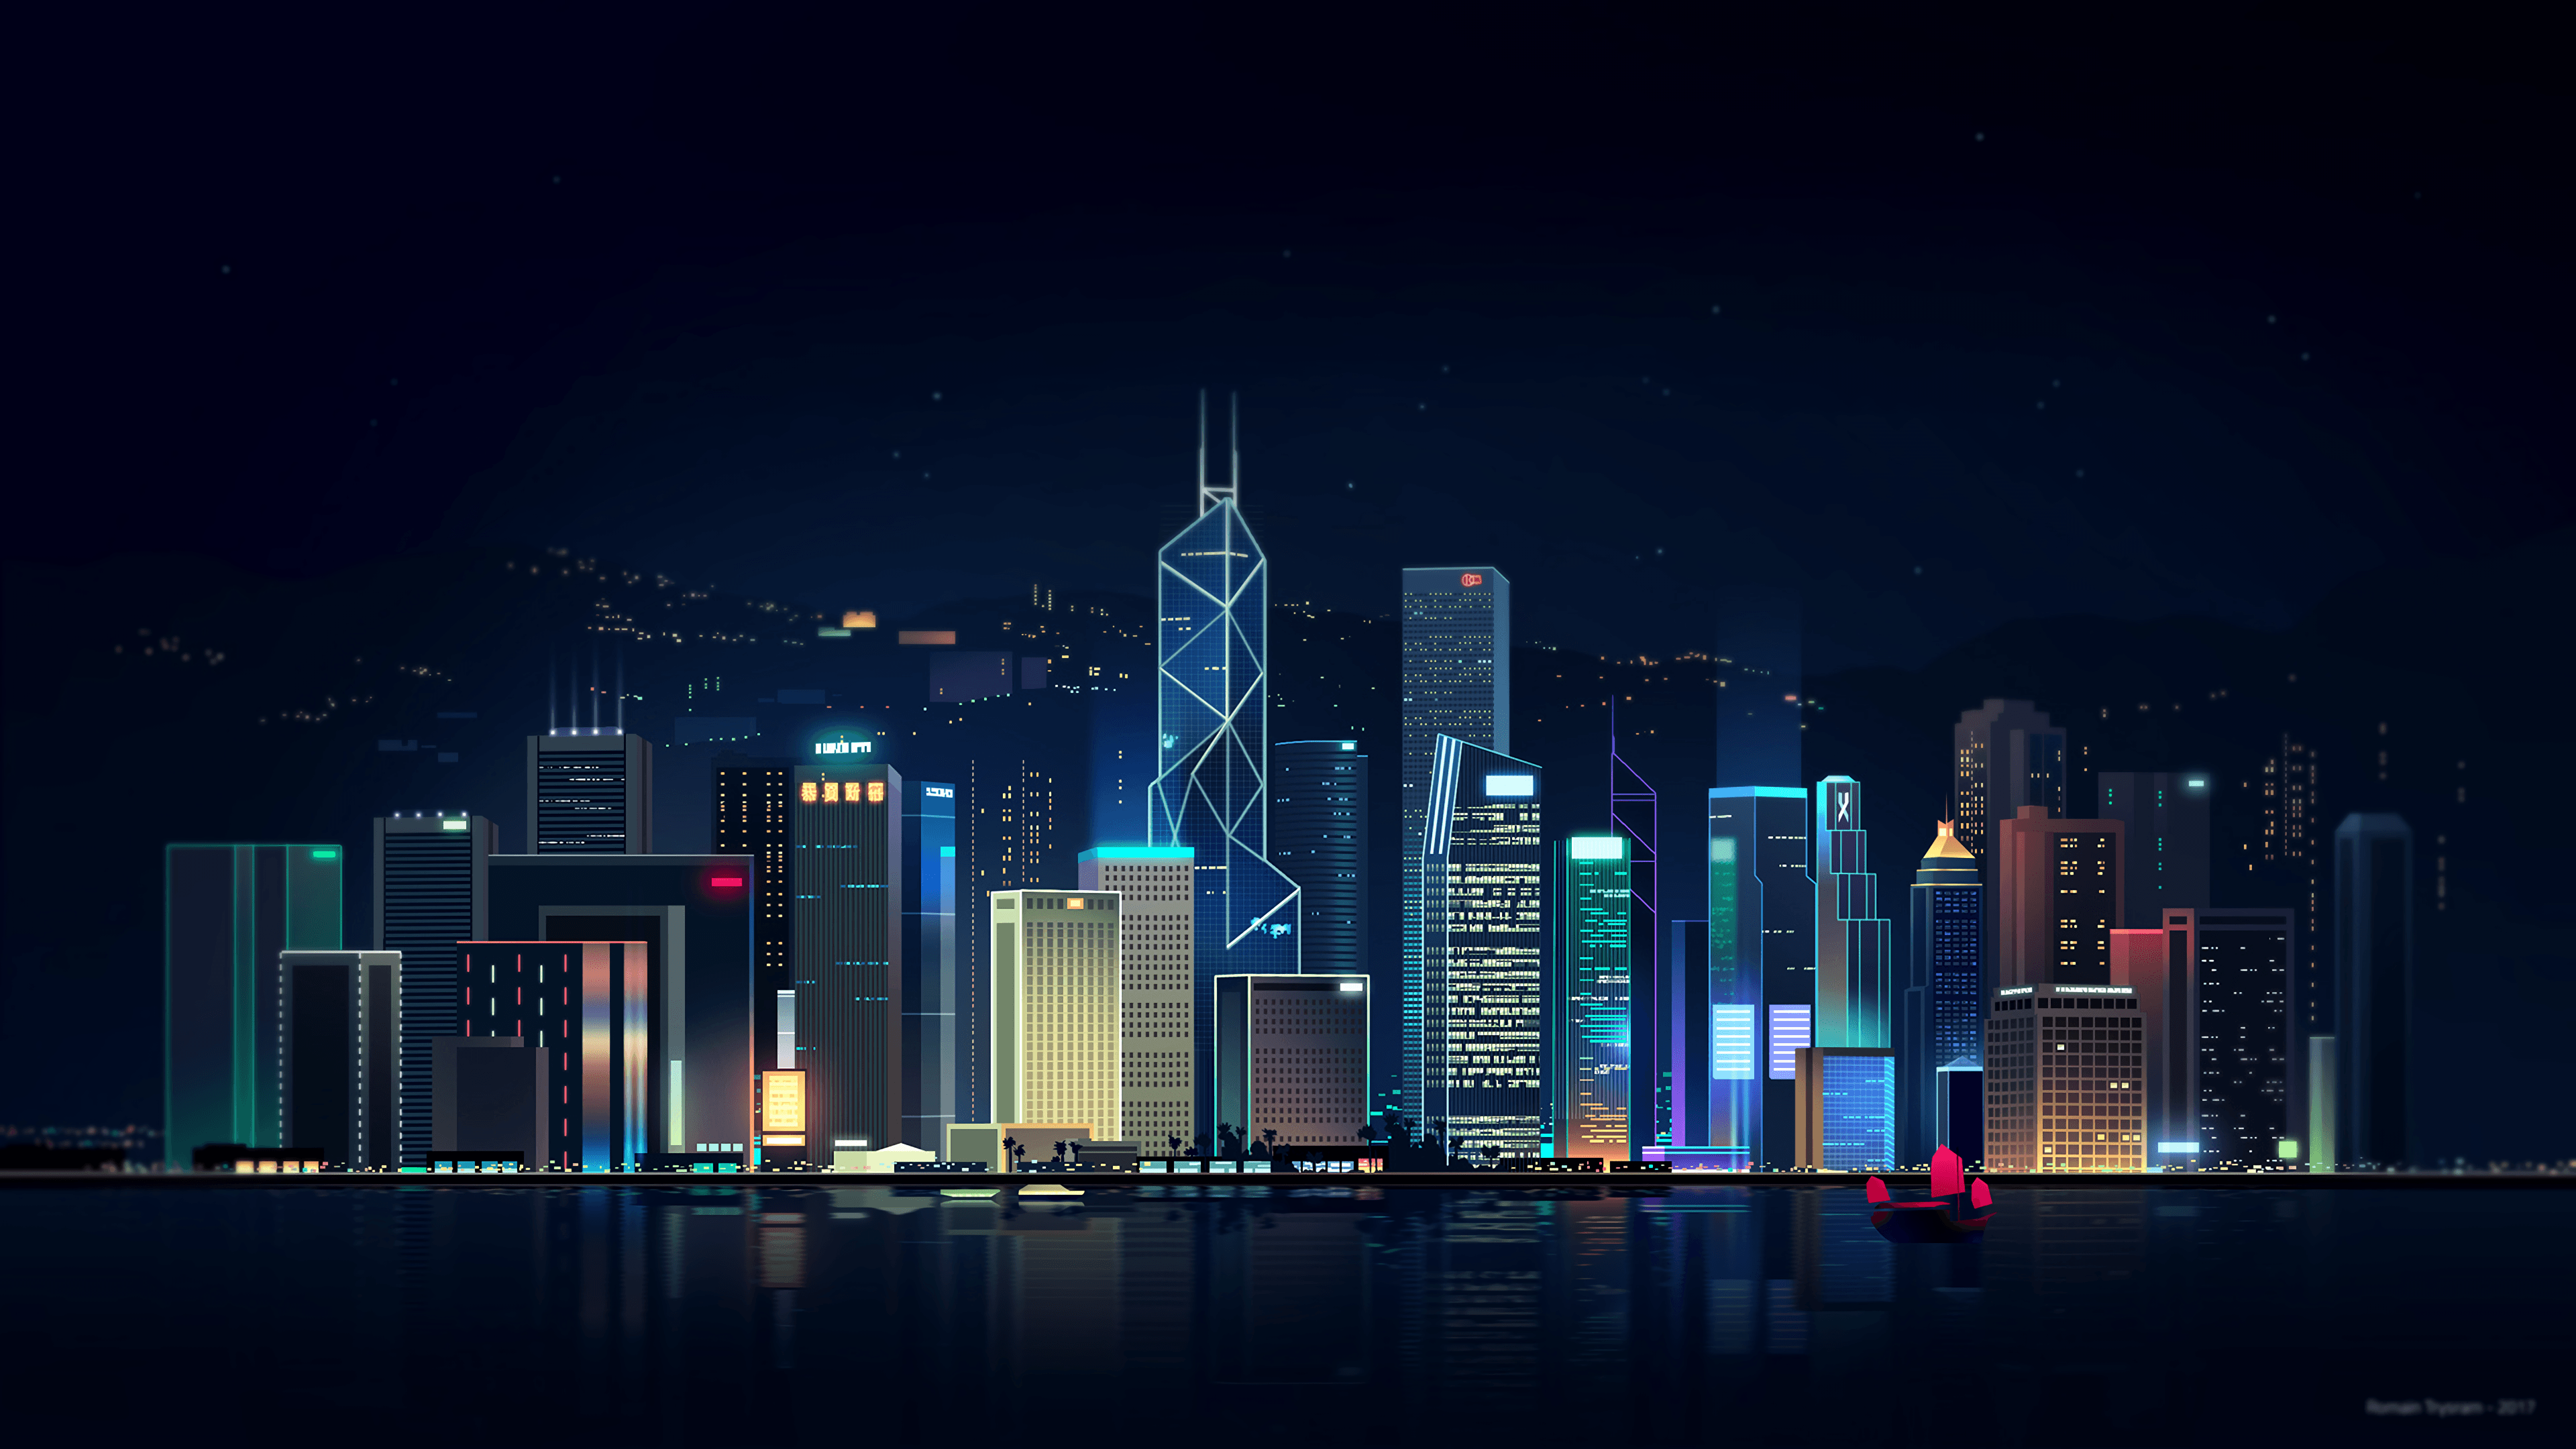 Neon City by Romain Trystram [3840x2160] #Music #IndieArtist